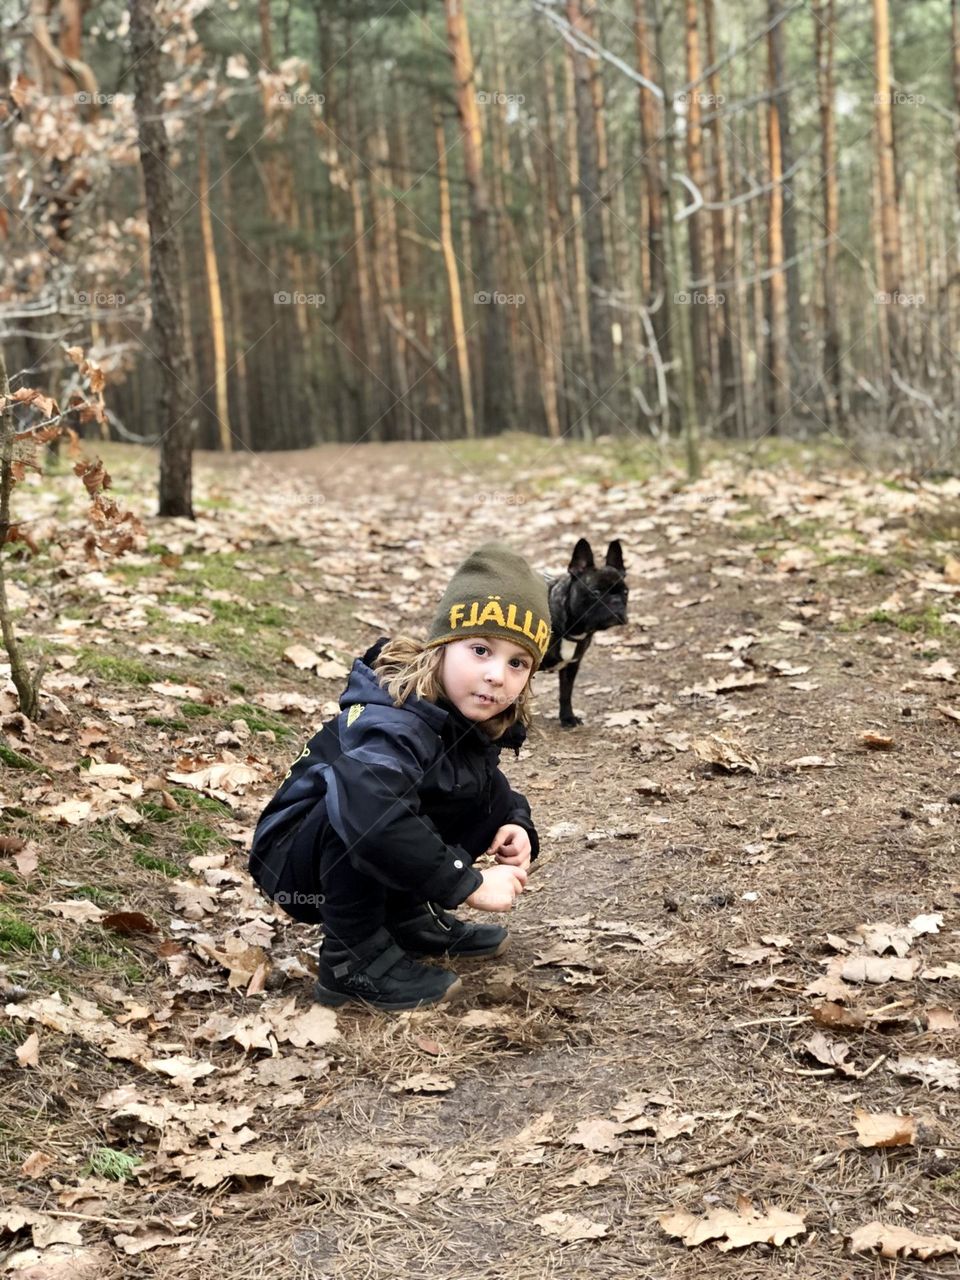 Boy with a dog in a forest